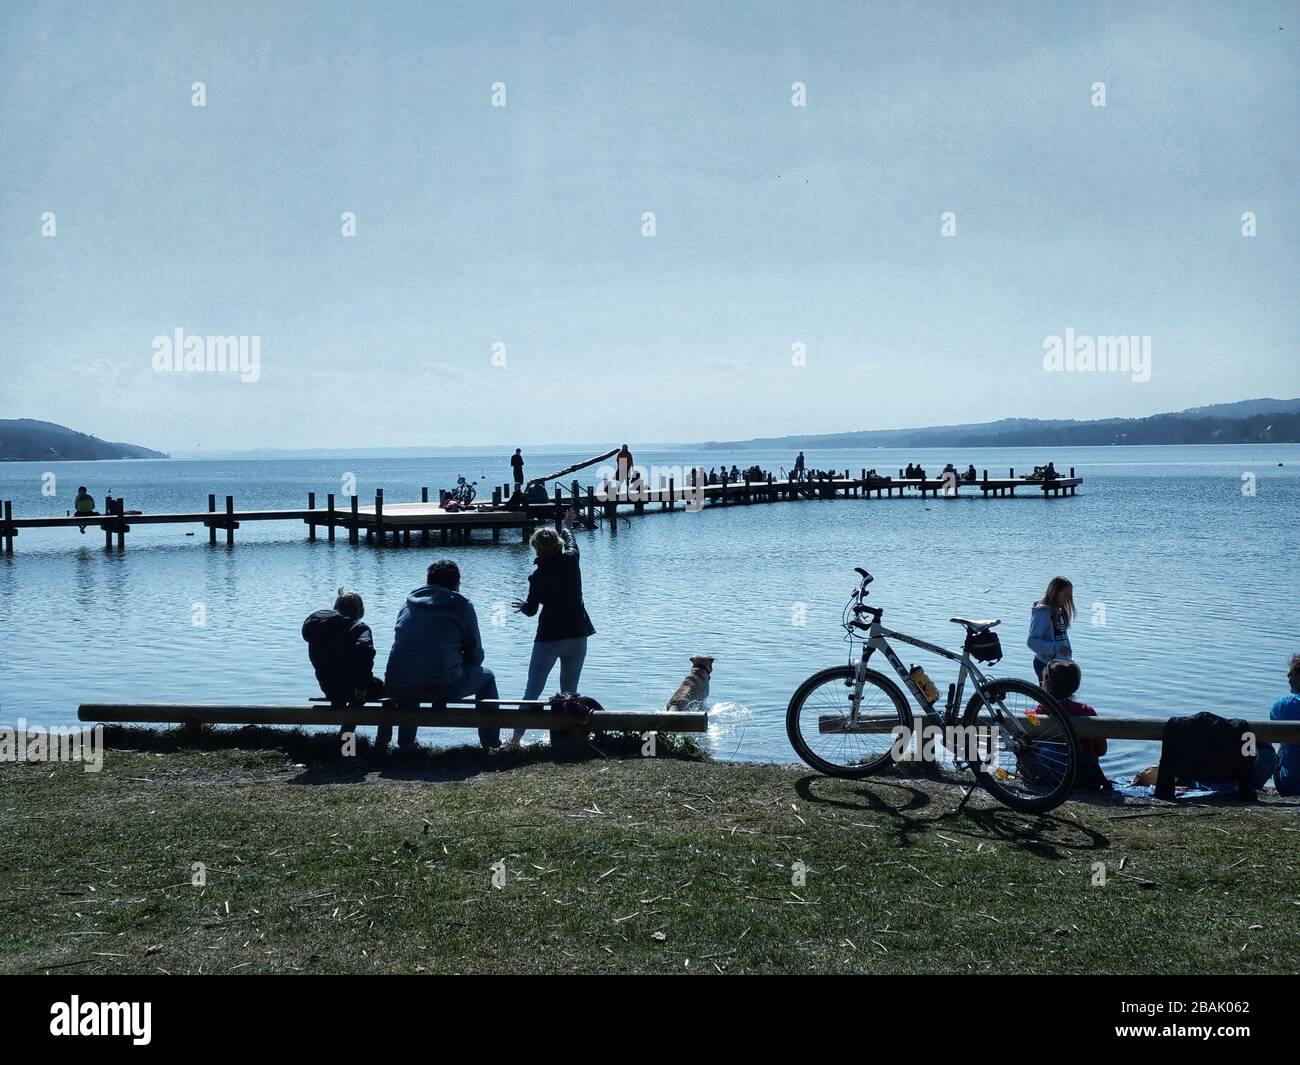 Lake Starnberg, Bavaria, Germany. 28th Mar, 2020. Despite the #stayinside and #savelives campaigns that run in addition to social and physical distancing guidelines, many in the Lake Starnberg area near Munich, Germany enjoy meeting in groups under sunny skies. Credit: Sachelle Babbar/ZUMA Wire/Alamy Live News Stock Photo